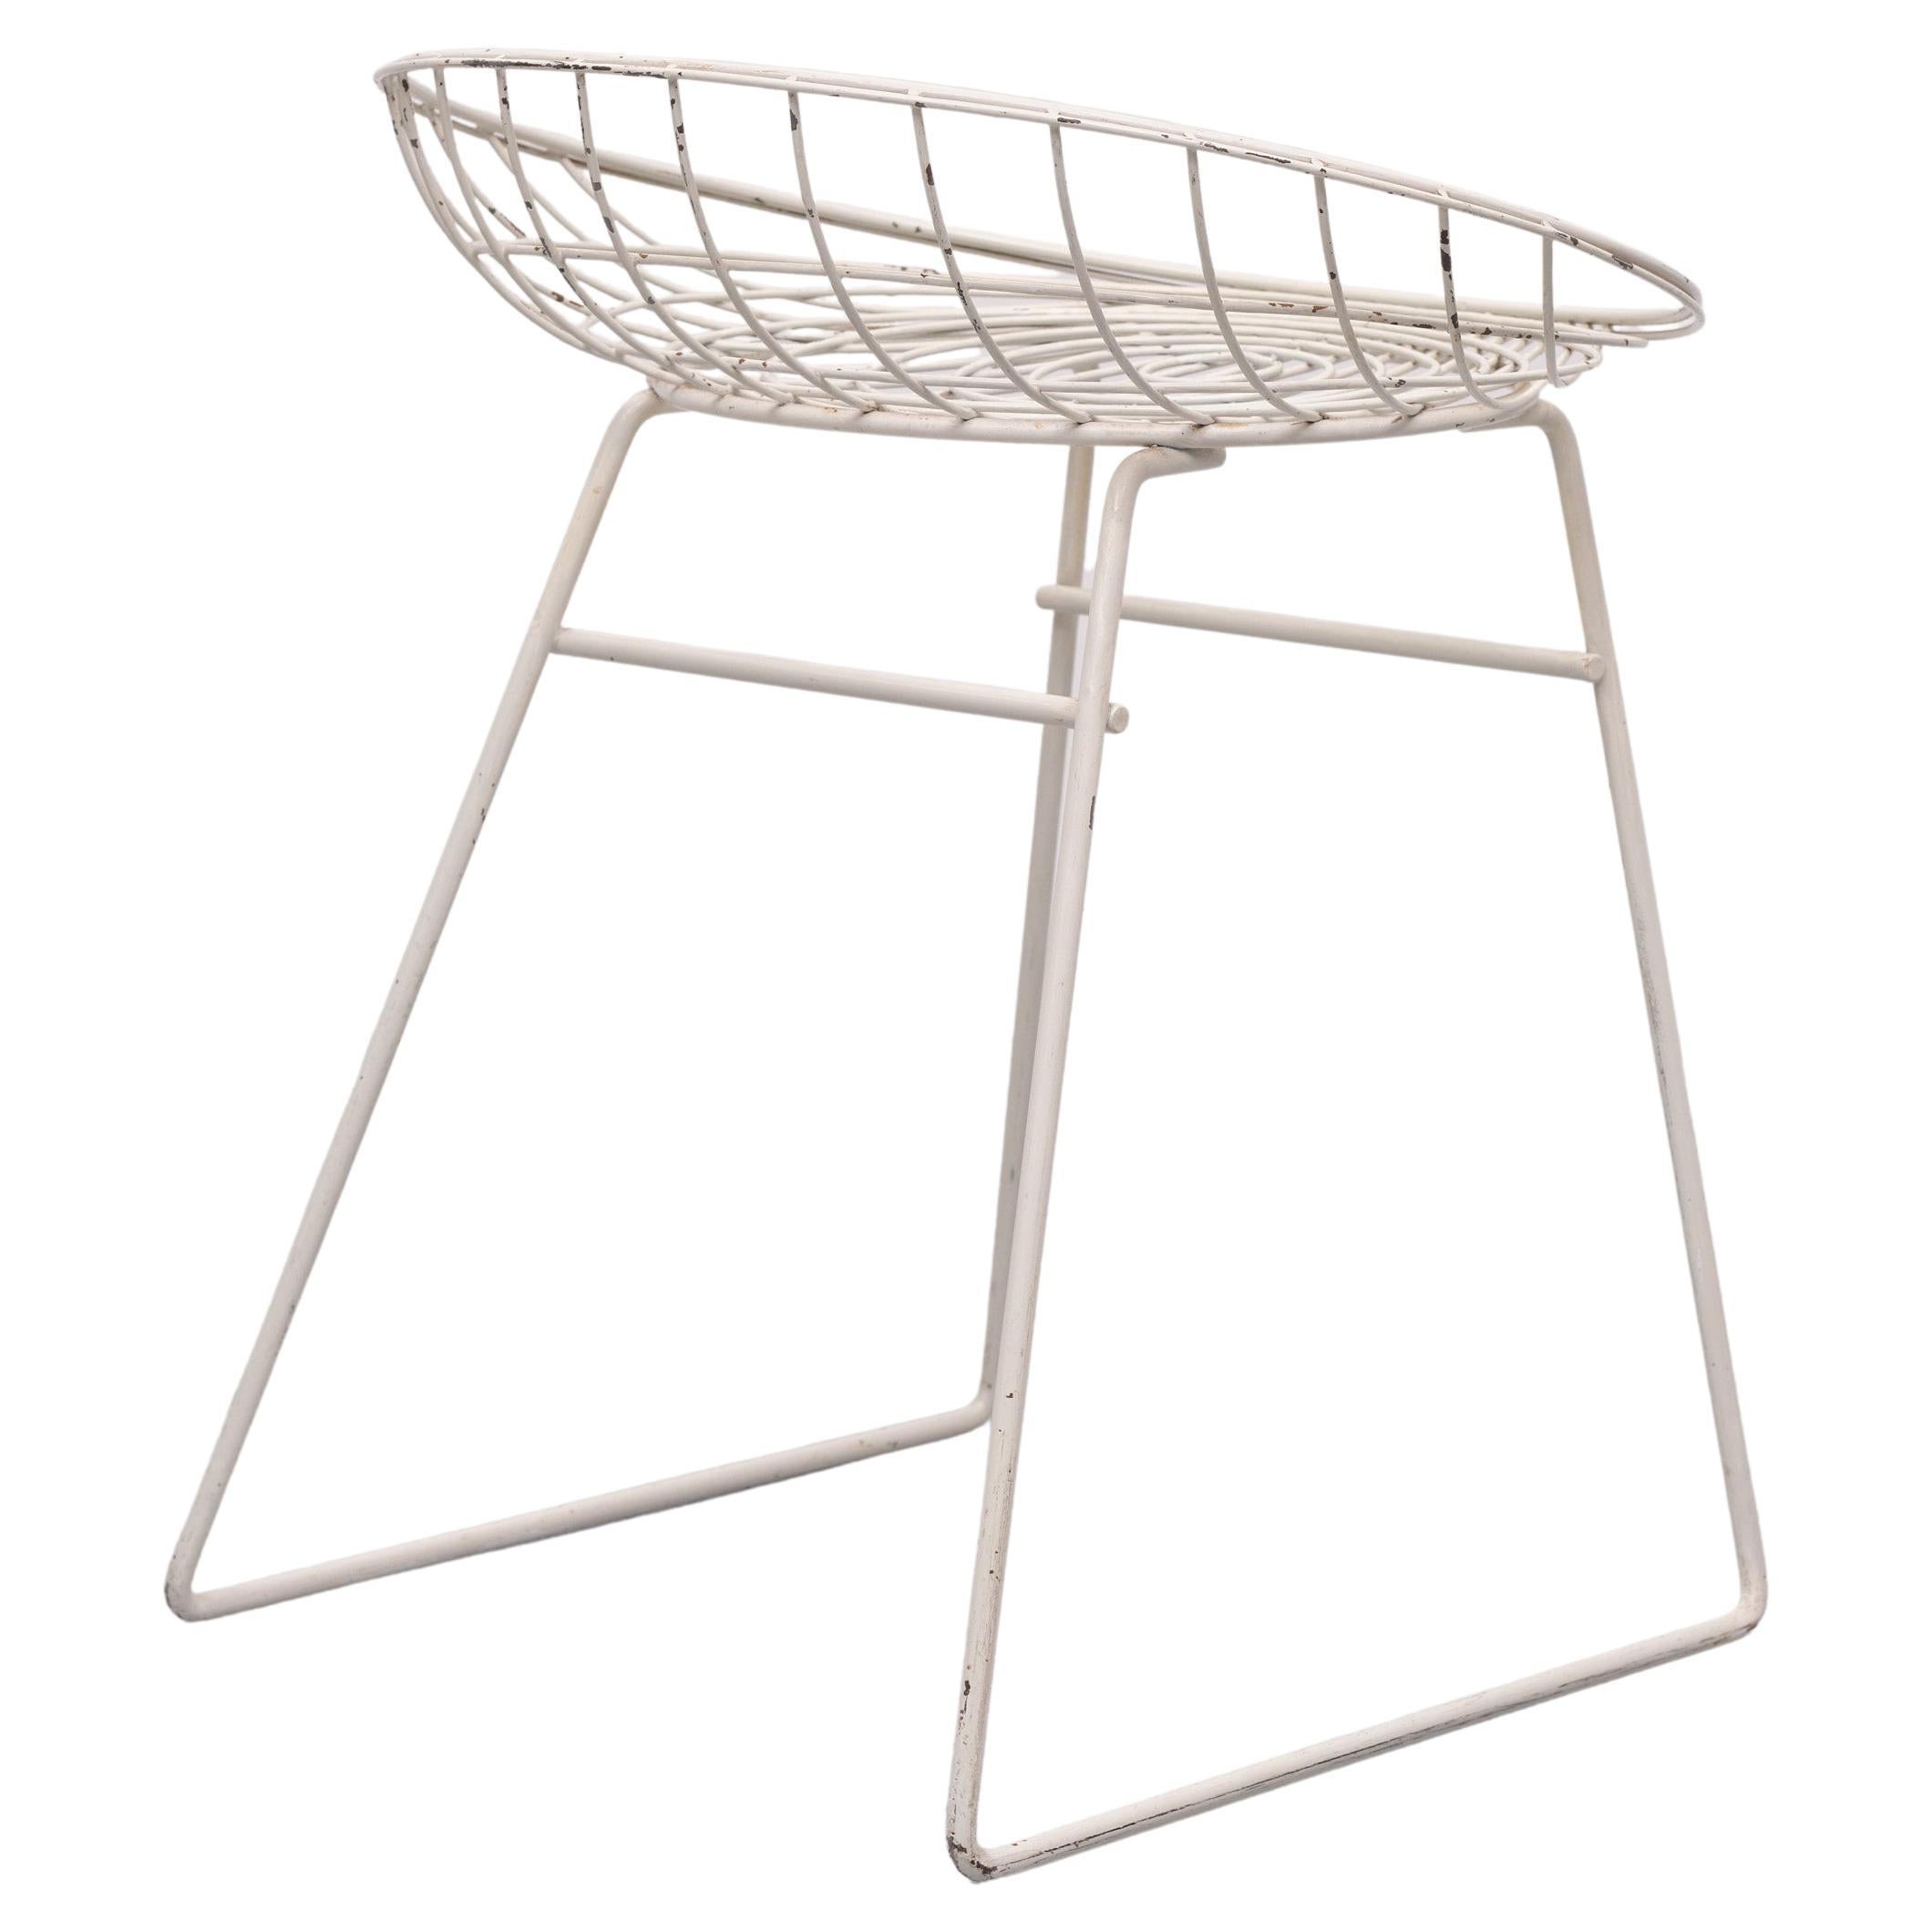 Dutch Design Icon. This Metal Wire stool. model KM05, early 1950s White color. Some normal Wear and Tear.